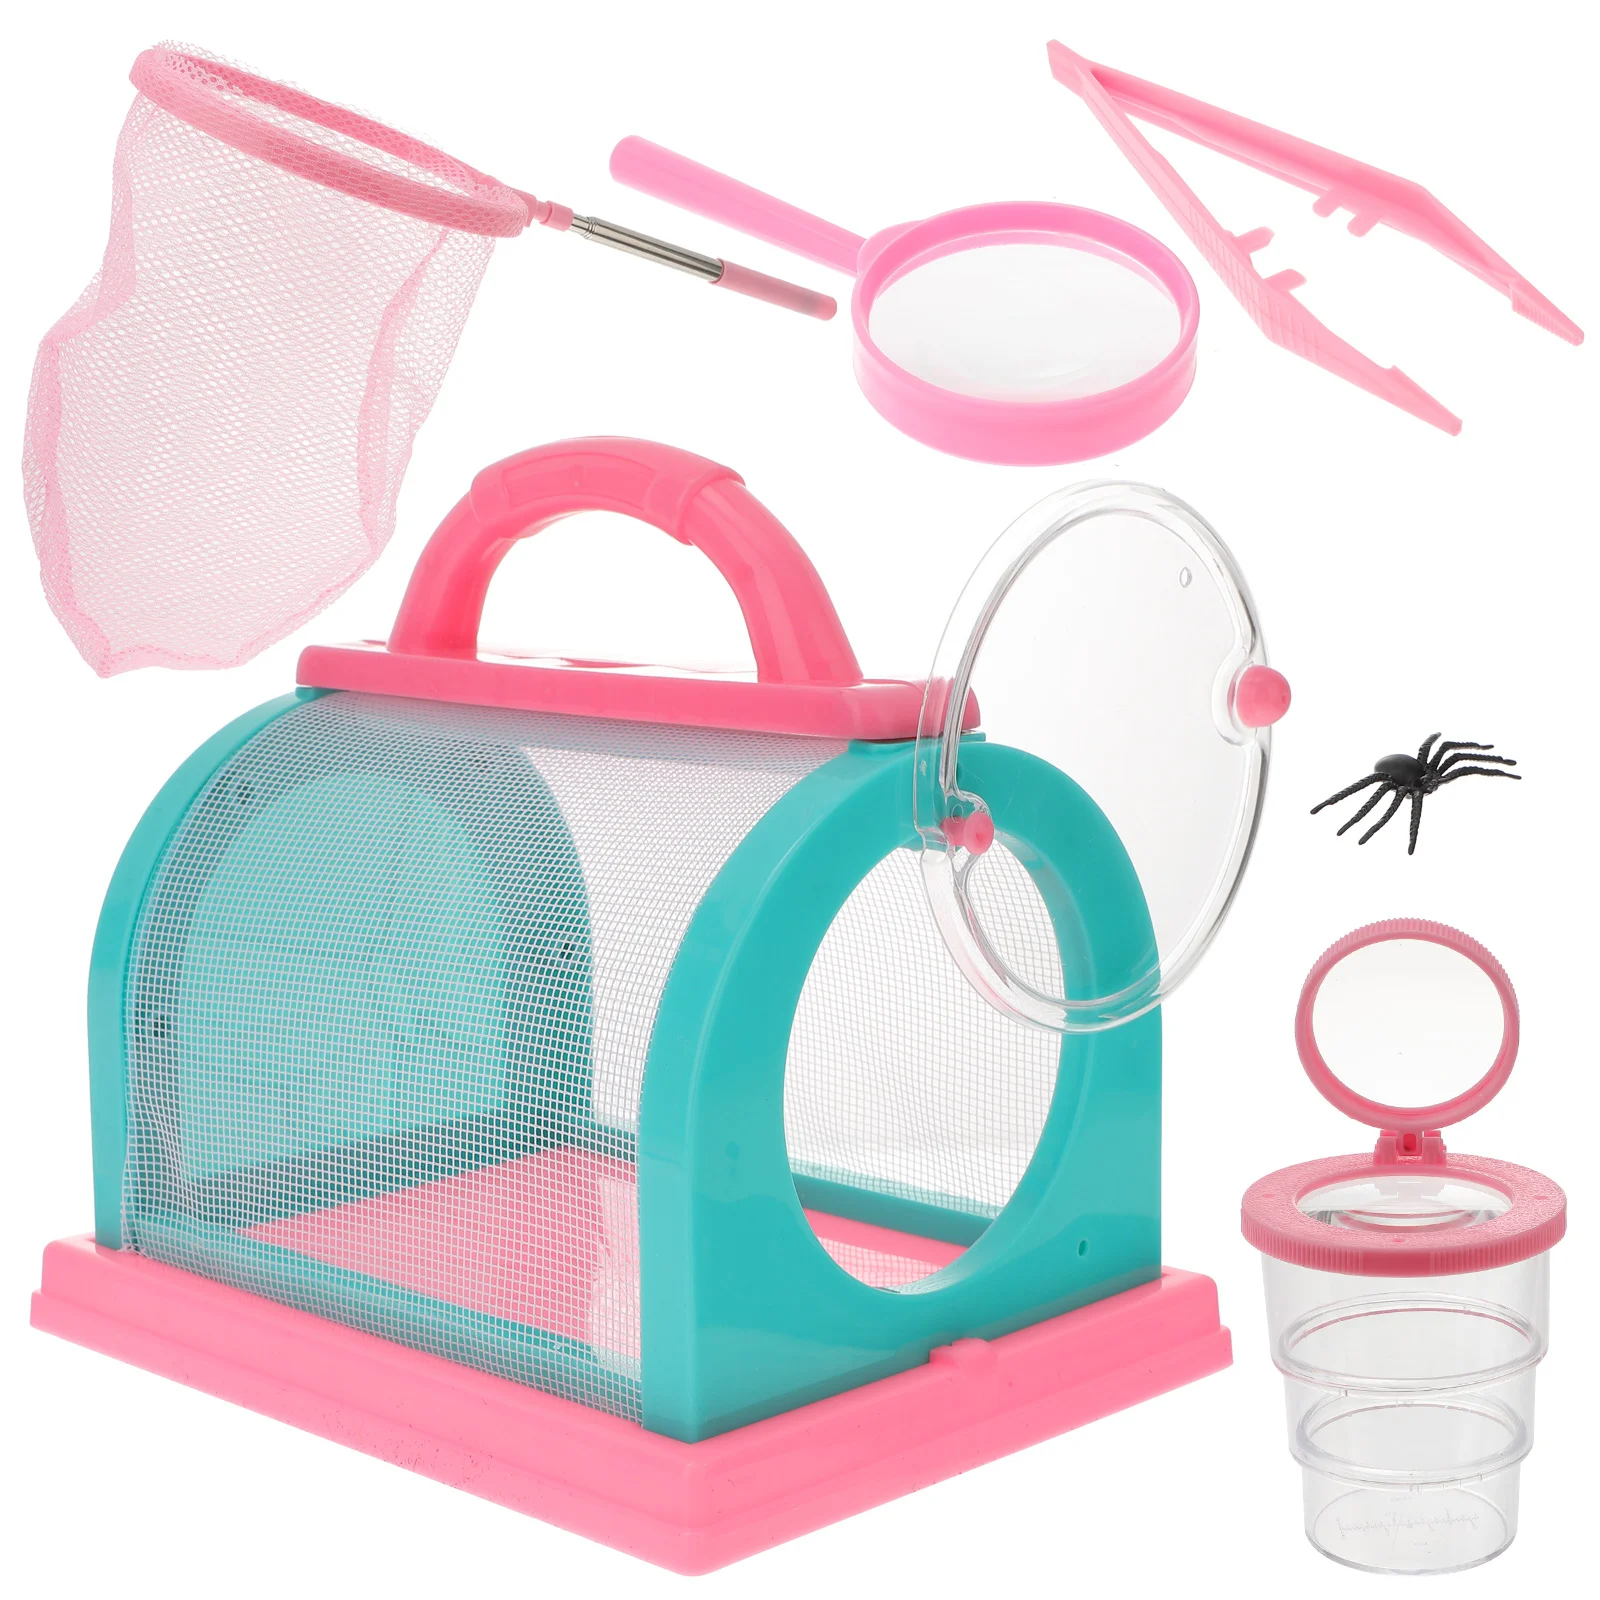 

Insect Observation Kit Kids Catcher Magnifier Catching Net Outdoor Cage Exploration Tweezers Bug Insects Explorer Toys Toddlers